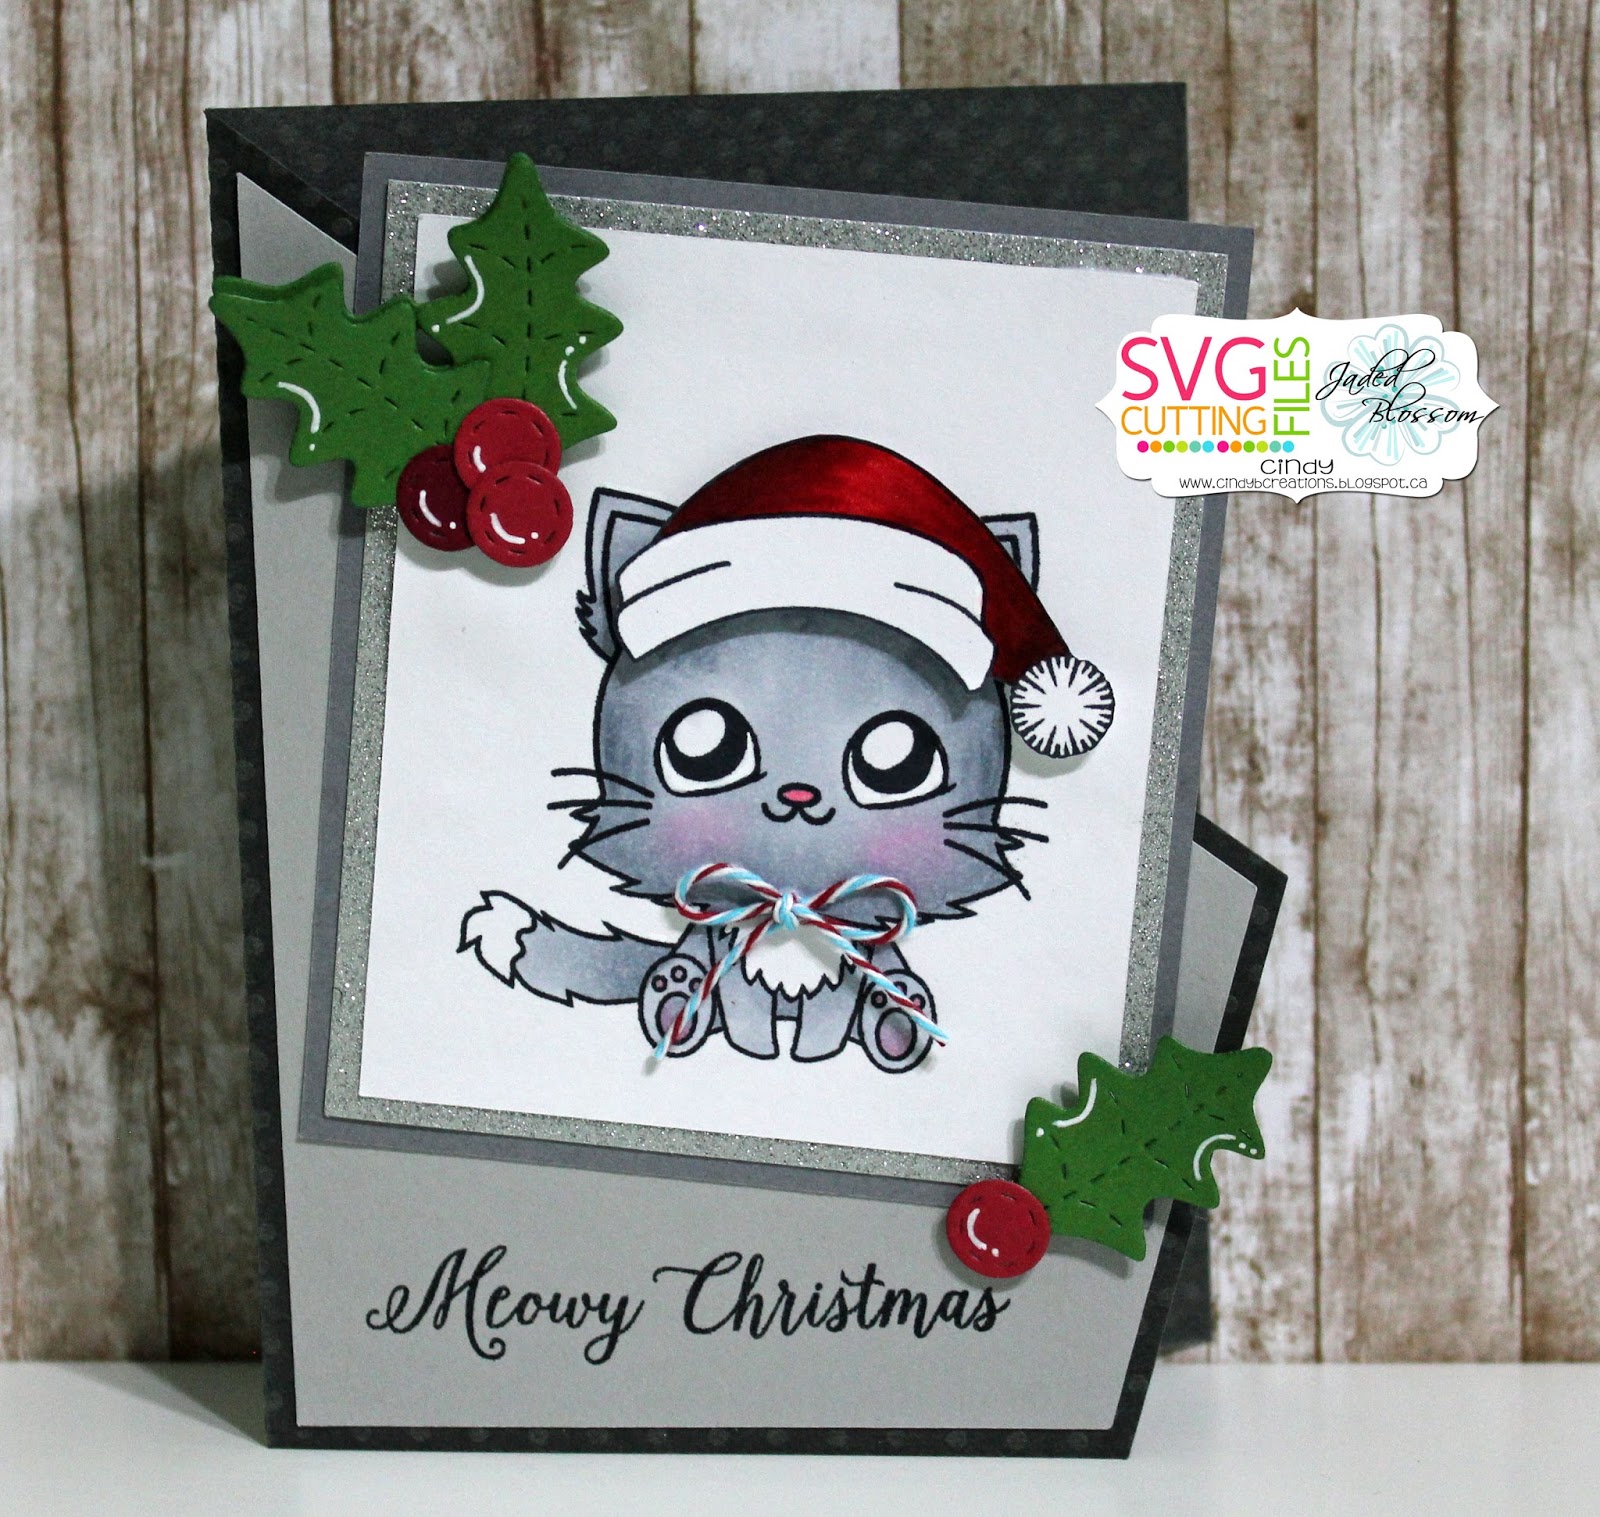 Download SVG Cutting Files: Meowy Christmas!!! :)